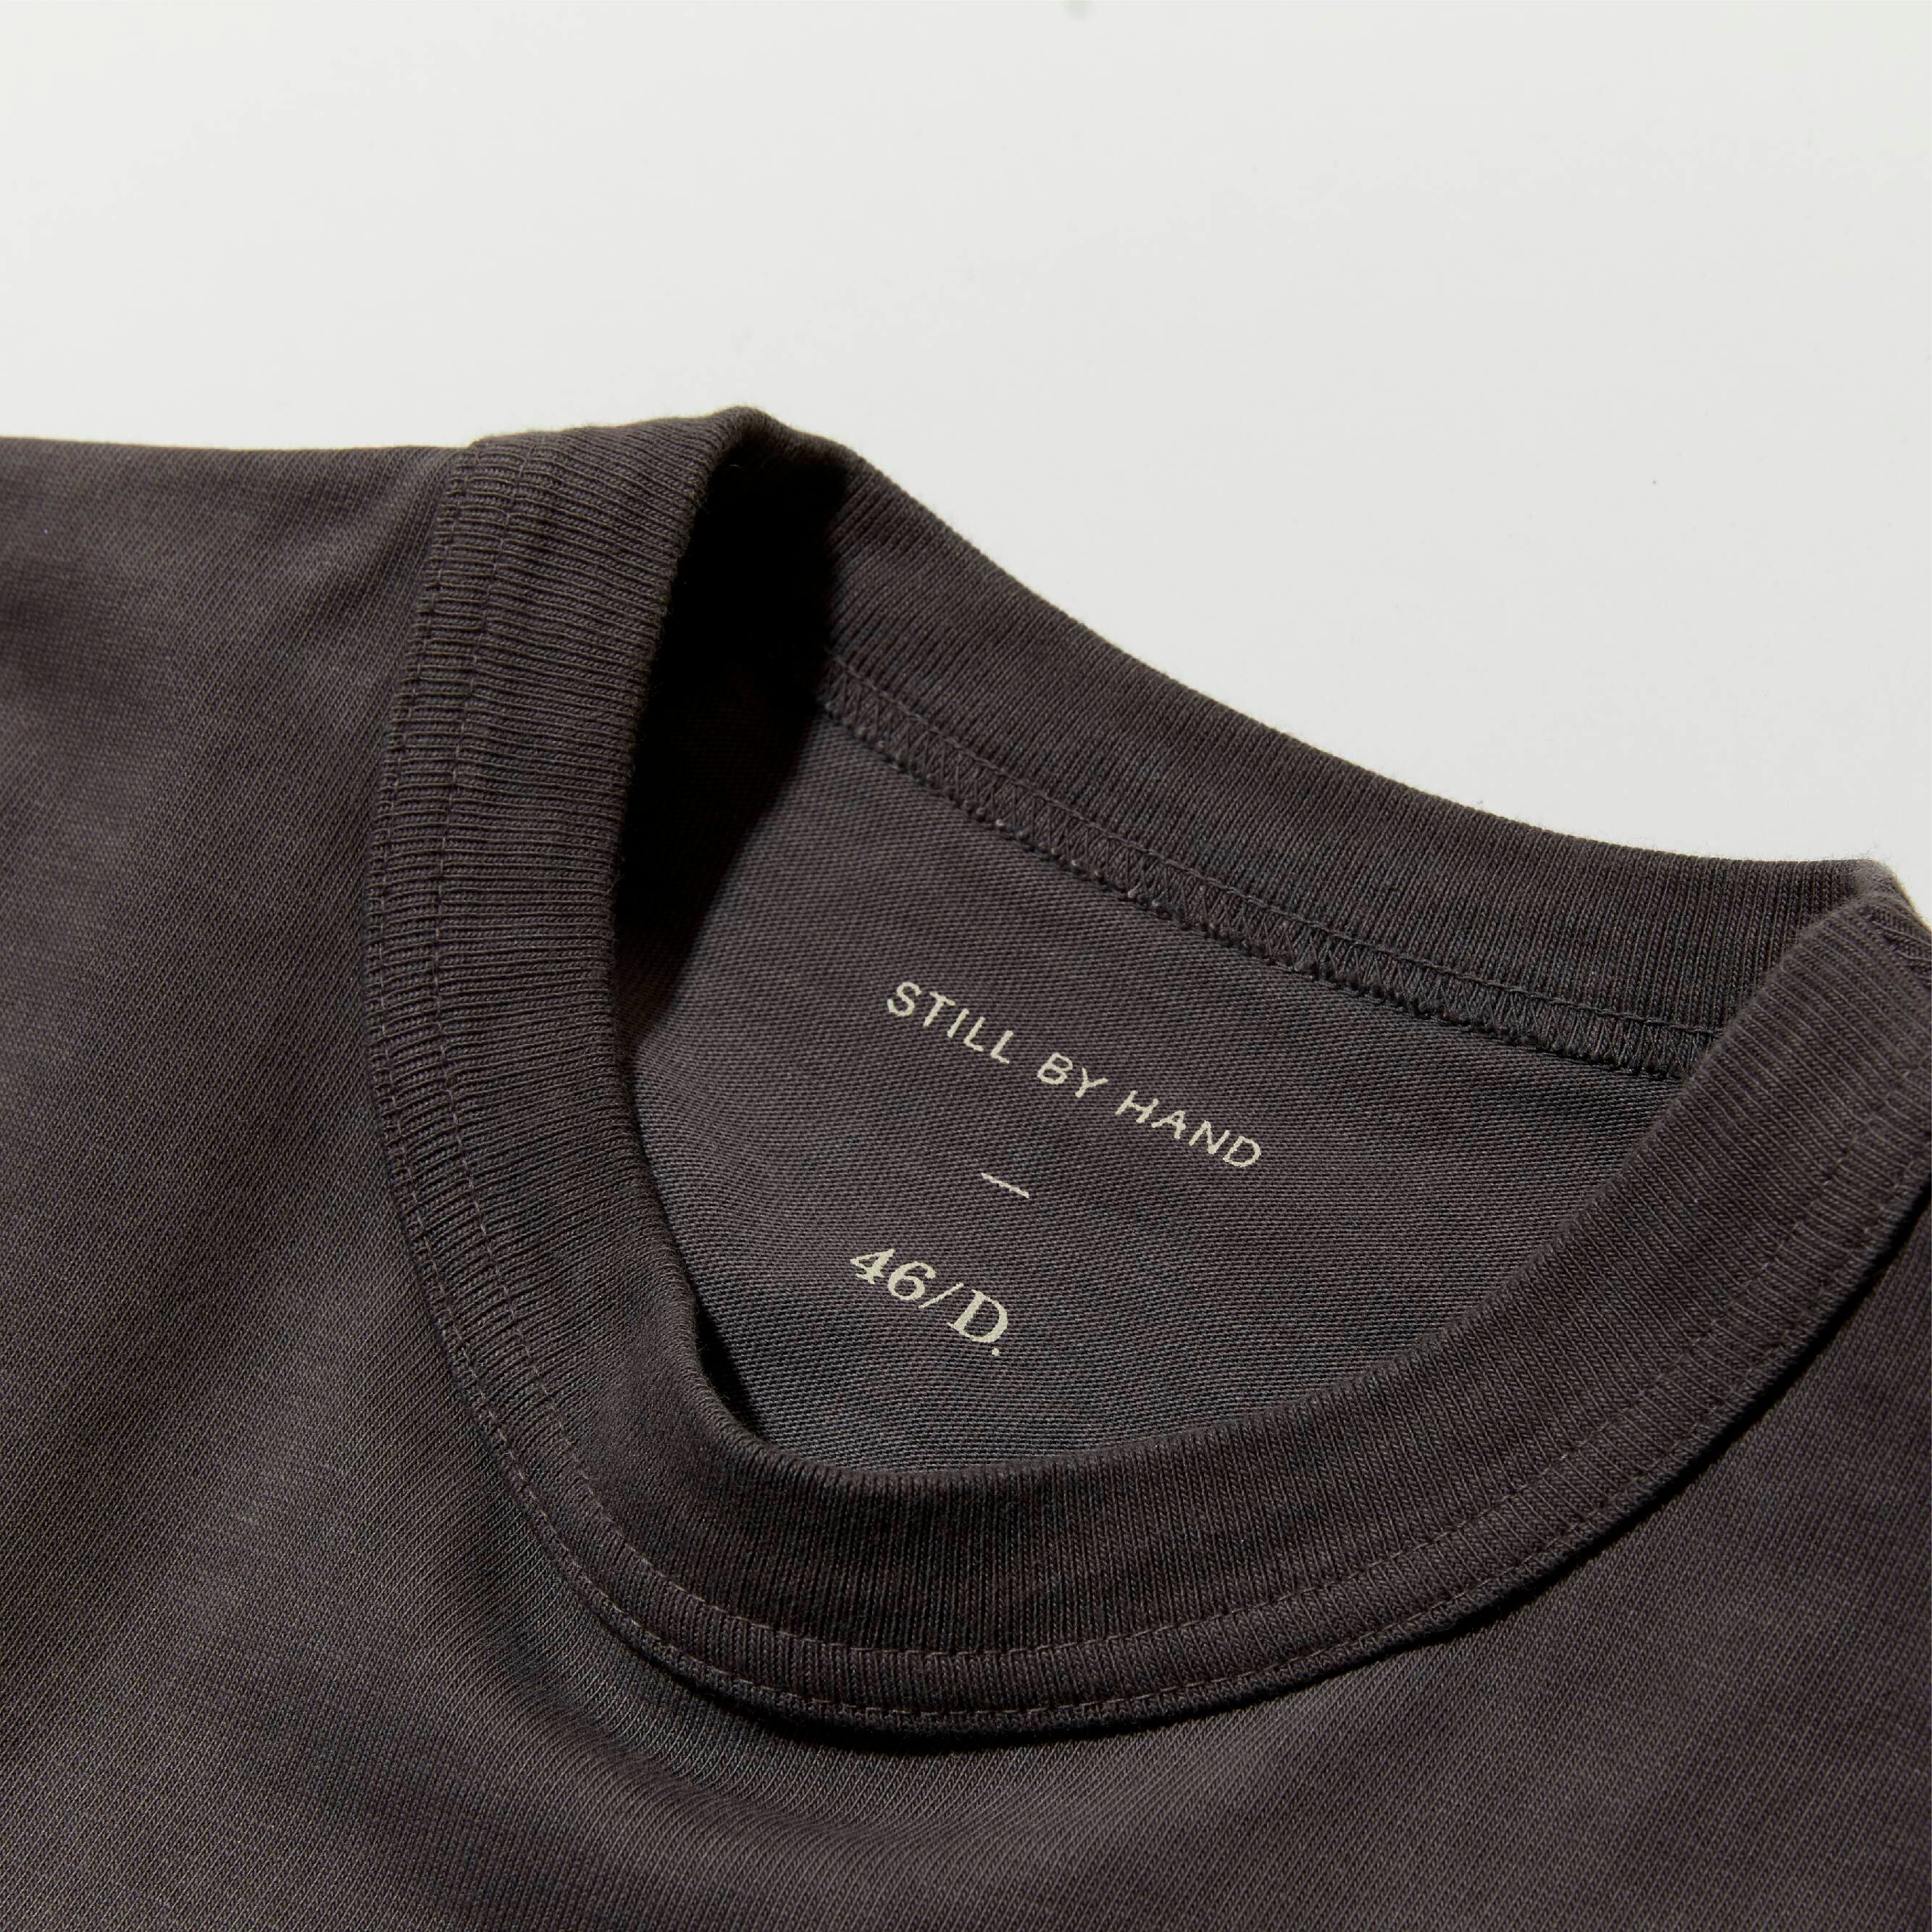 〈STILL BY HAND × 46/D.〉T-SHIRT | 46/D. - THE GOOD OLD PRODUCTS powered by  BASE